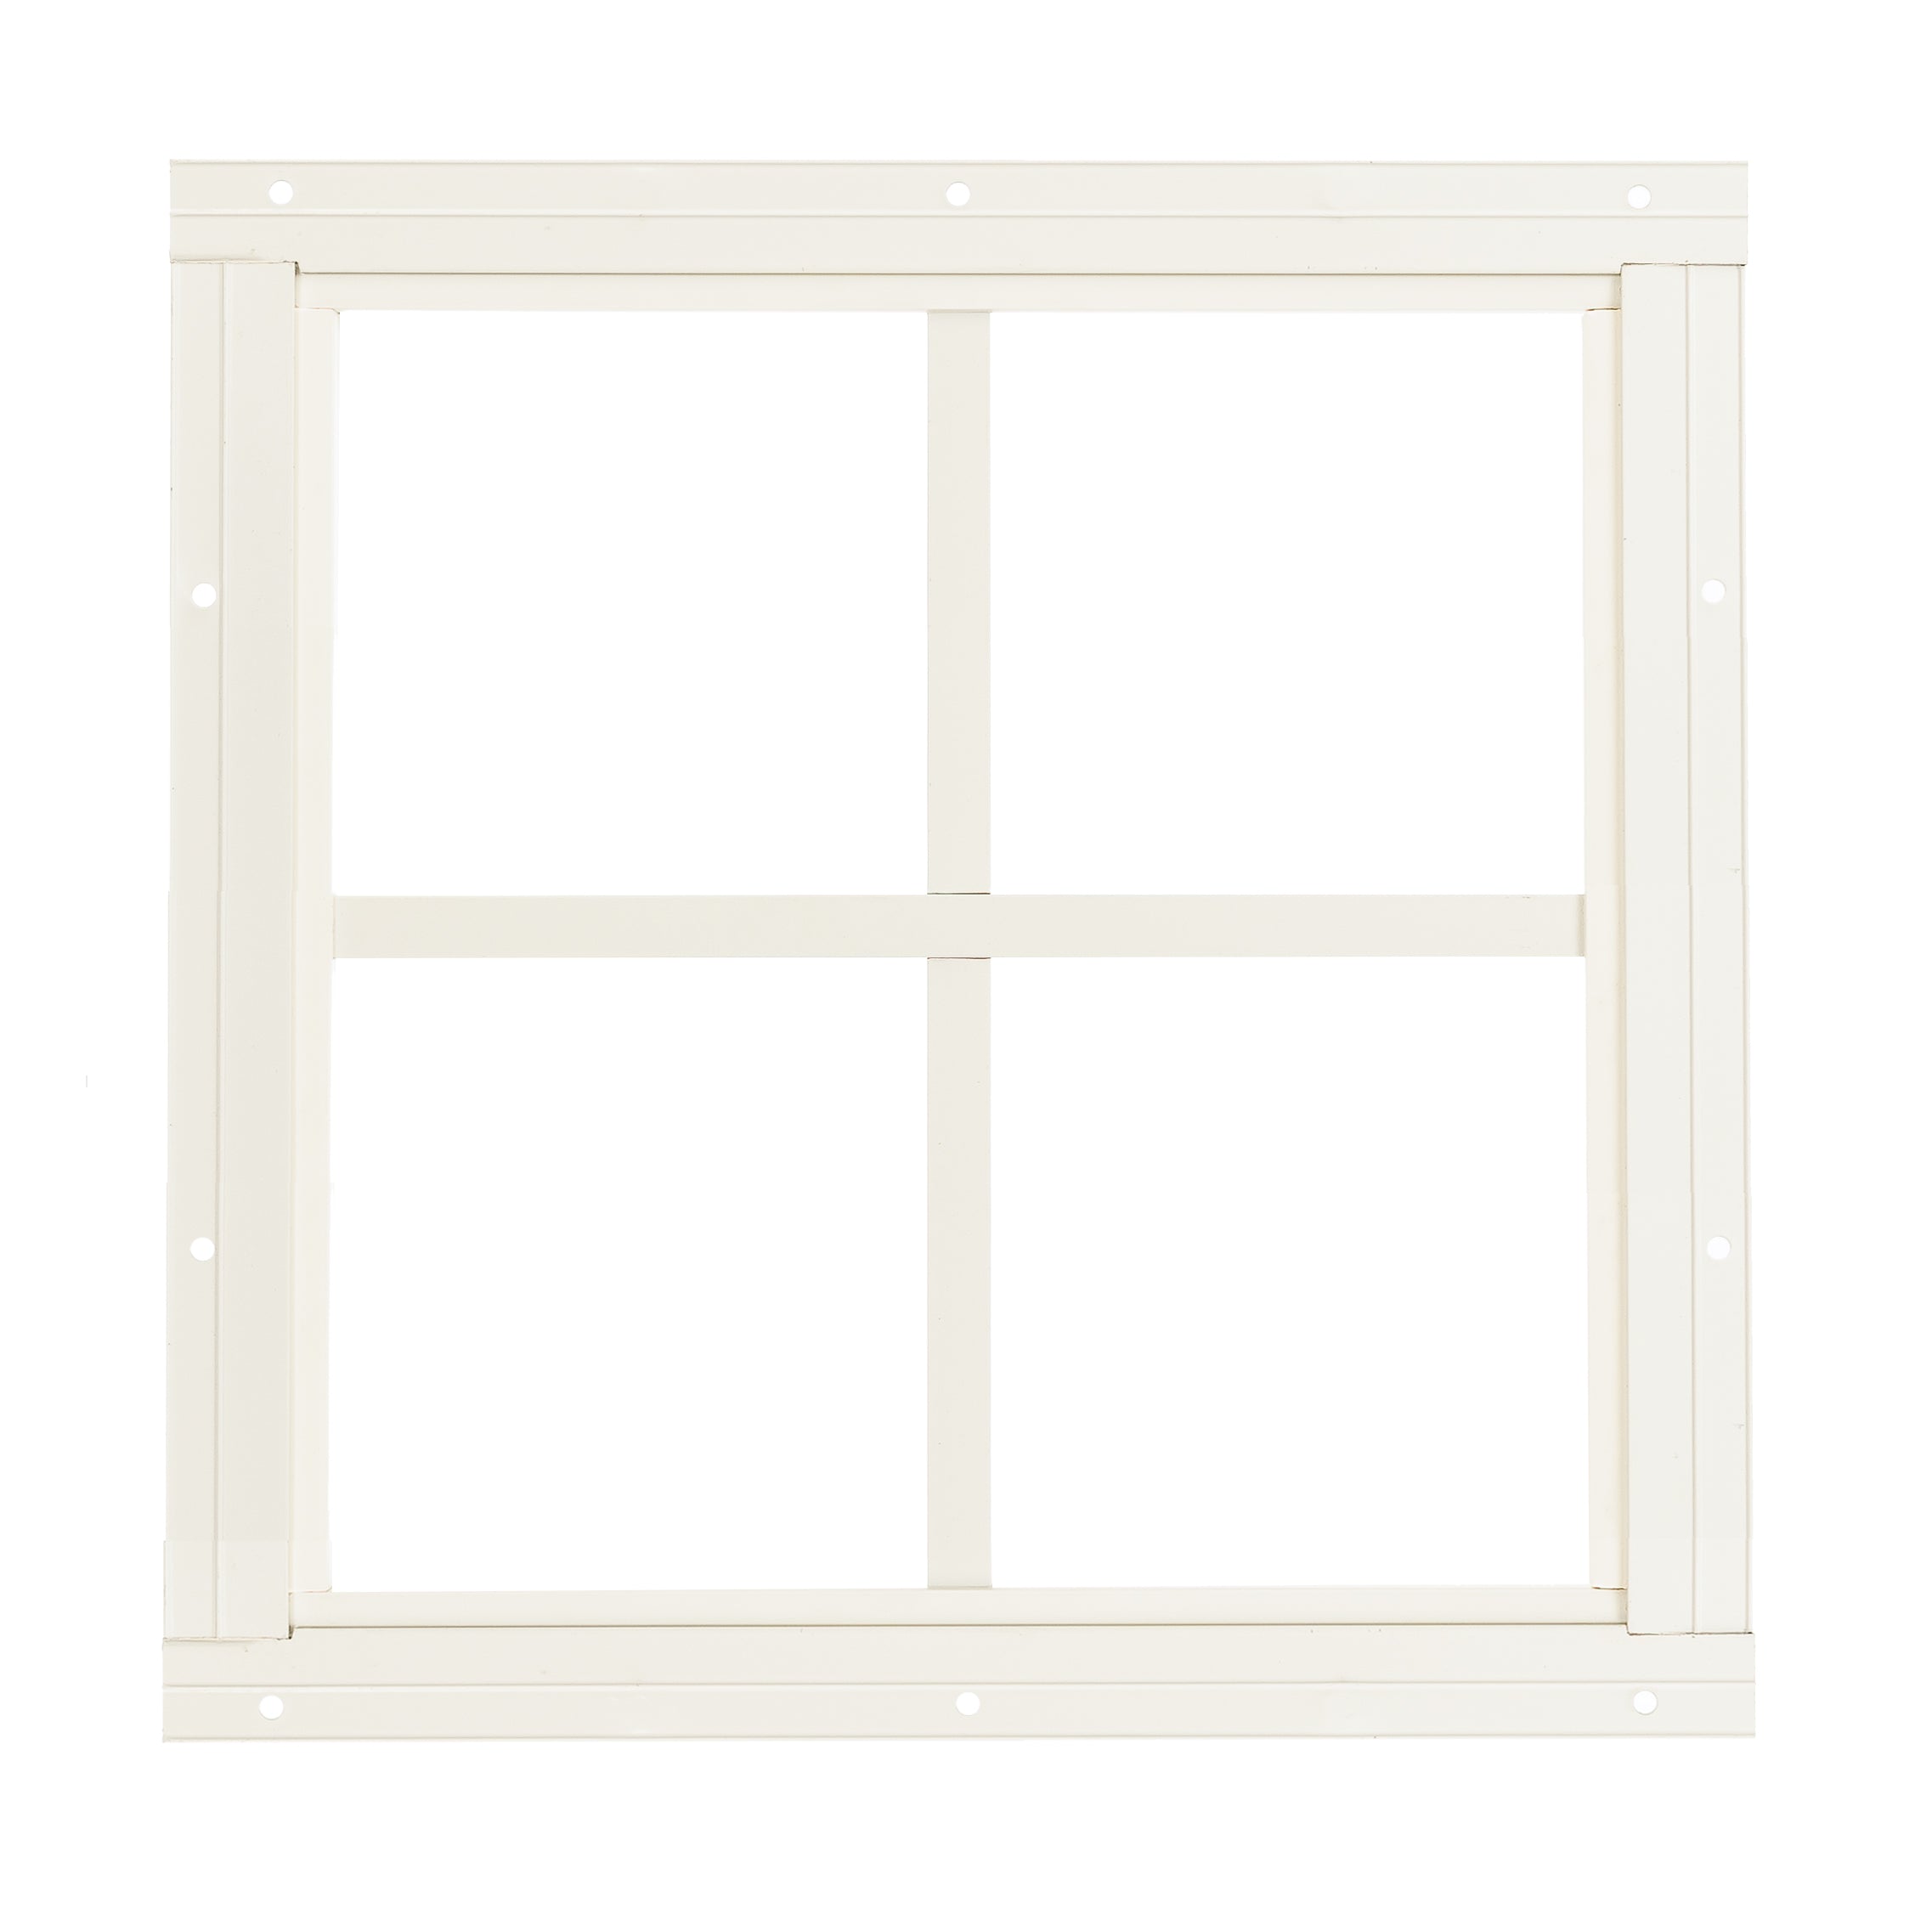 12" W x 12" H Square Gable Flush Mount White Window with for Sheds, Playhouses, and MORE